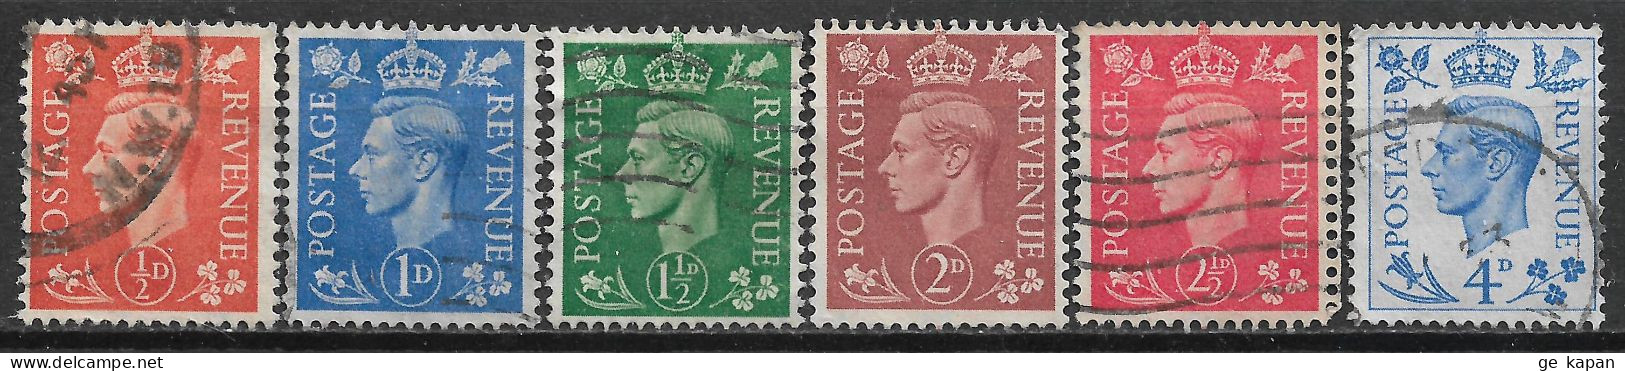 1950-1951 GREAT BRITAIN Complete Set Of 6 Used Stamps (Scott # 280-285) CV $4.00 - Used Stamps